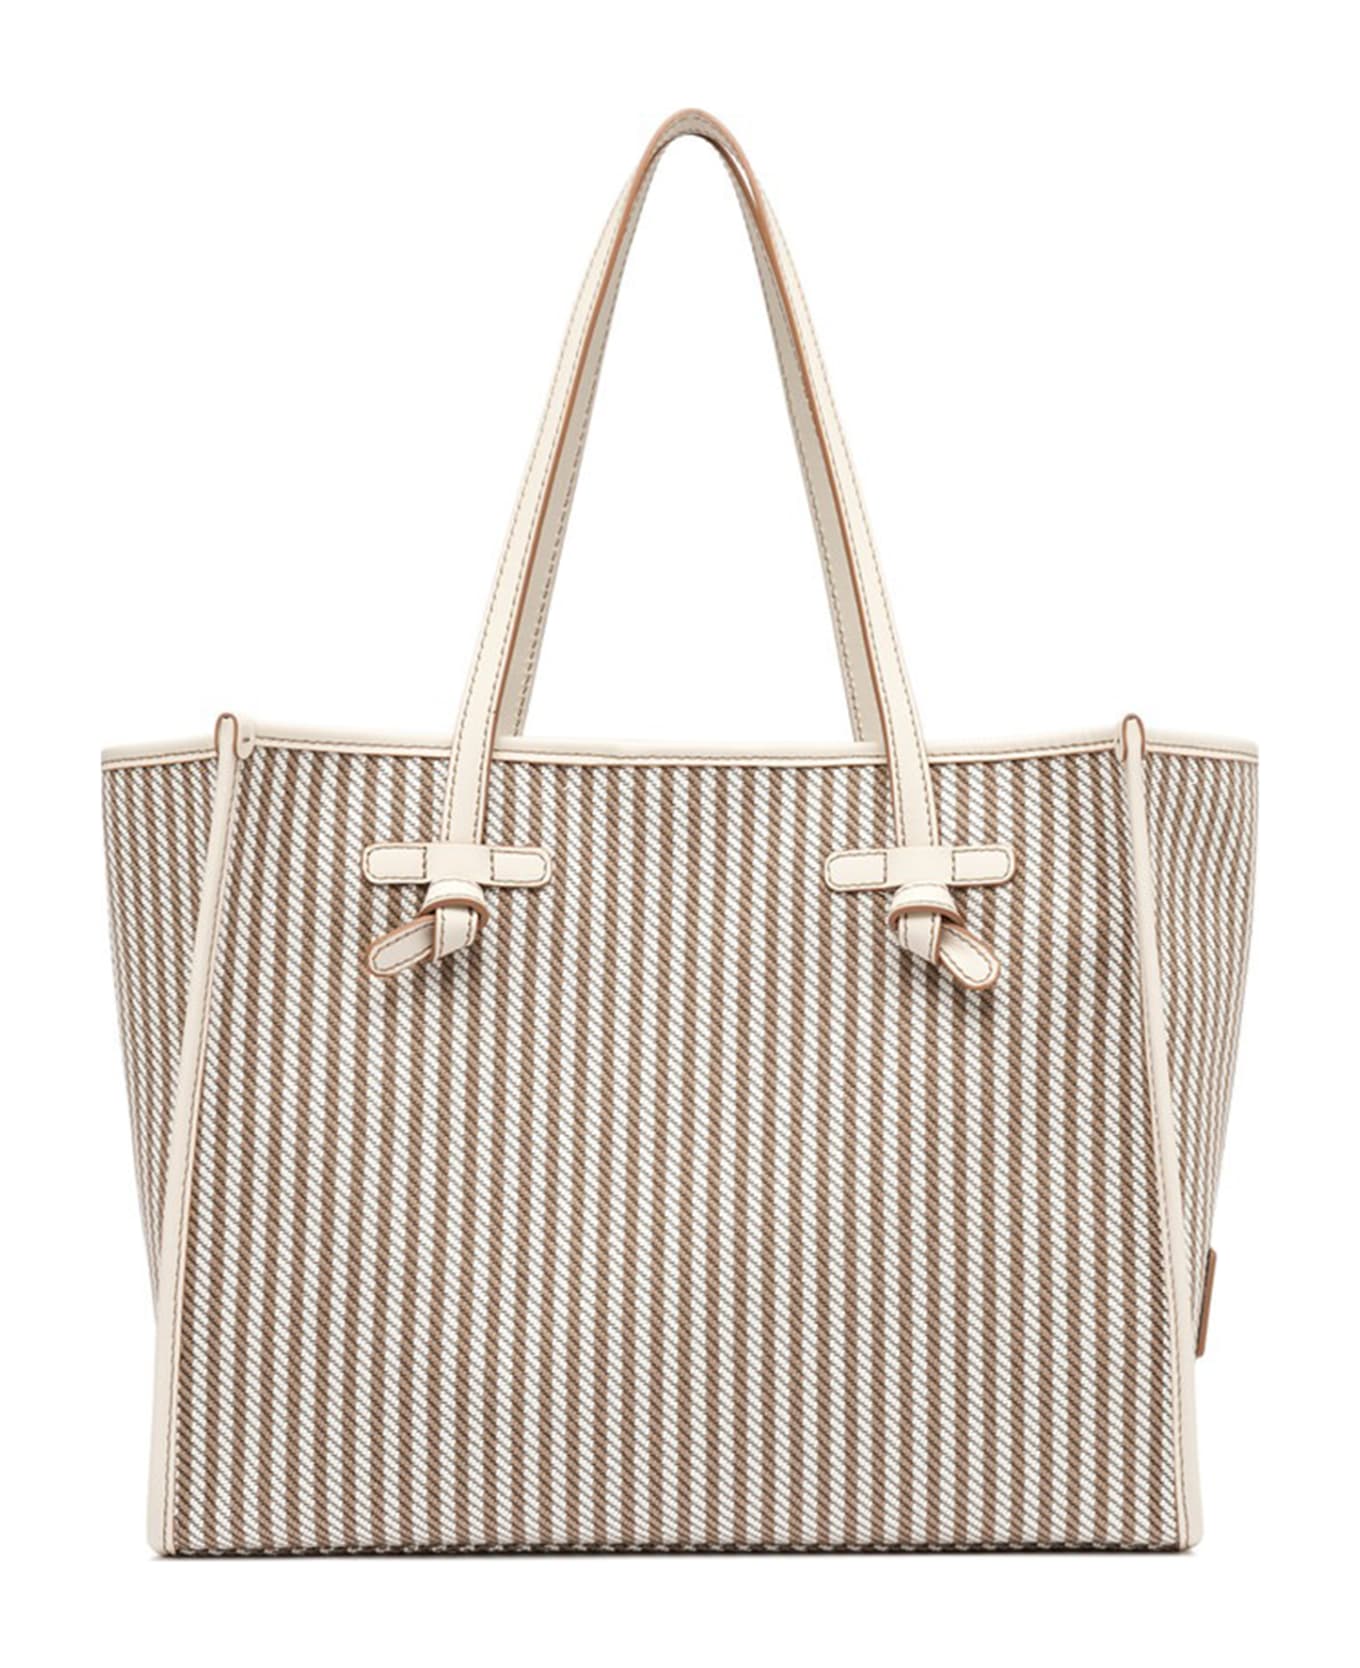 Gianni Chiarini Marcella Shopping Bag With Striped Motif - VAR.MARBLE トートバッグ